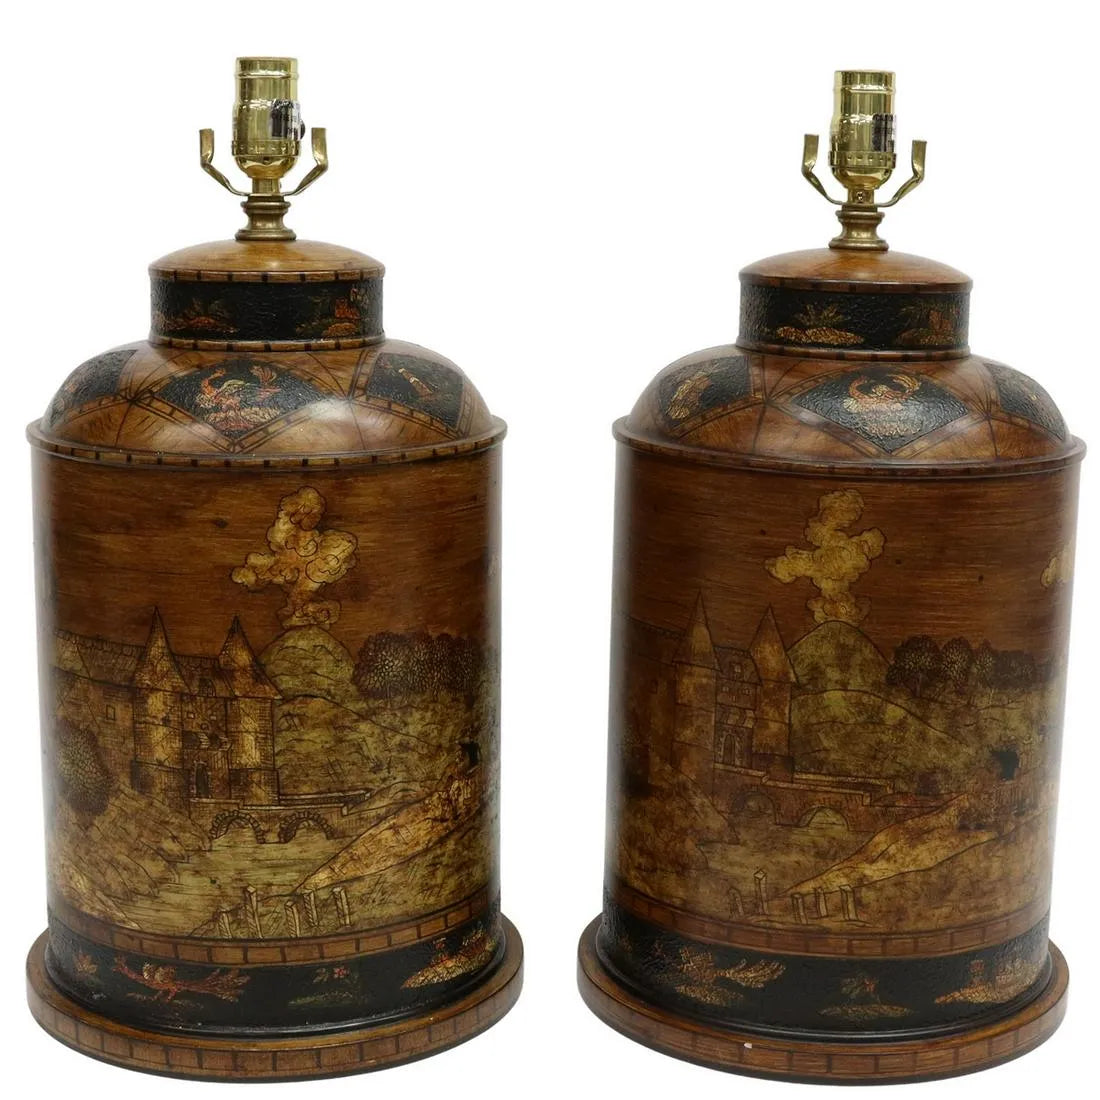 Pair of Decorative Canister-Form Table Lamps